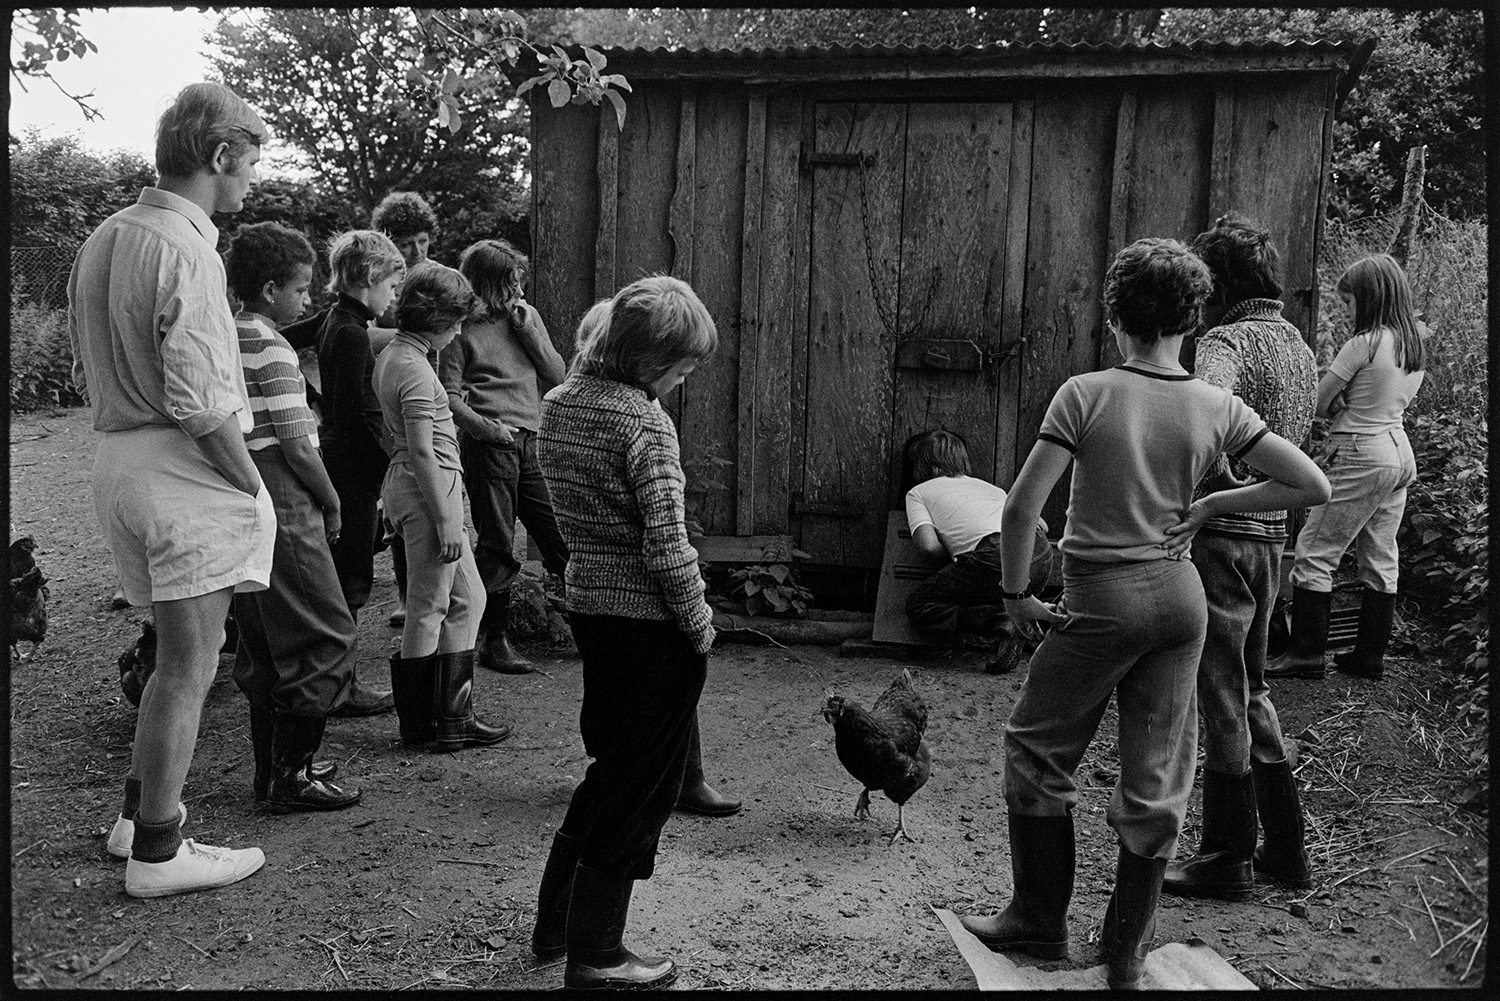 Children looking at farm Farms for City Children. 
[A group of children looking at a poultry house and hens at Farms for City Children, Nethercott, Iddesleigh. The man supervising them may be Michael Morpurgo.]